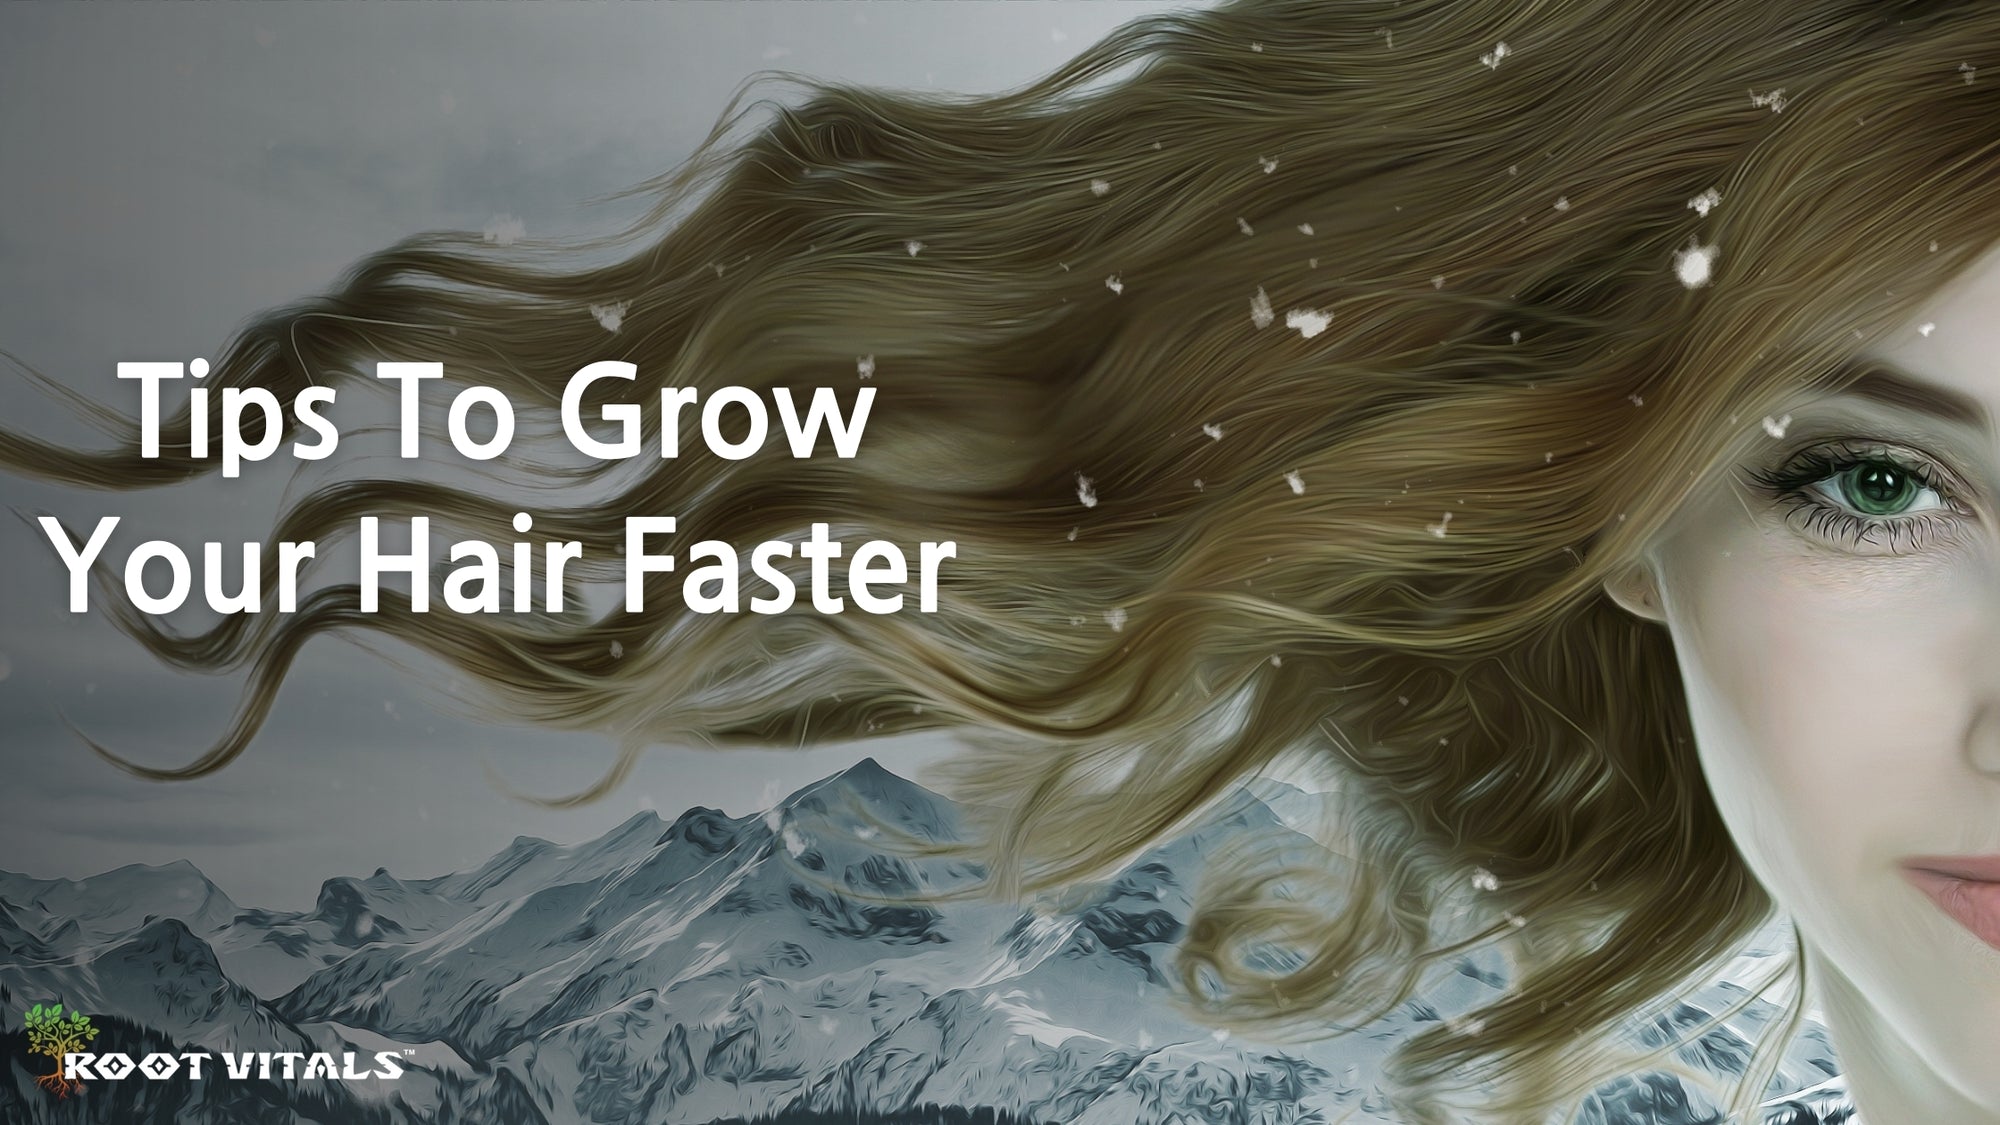 Tips to Grow Your Hair Faster Using Natural Hair Growth Tips